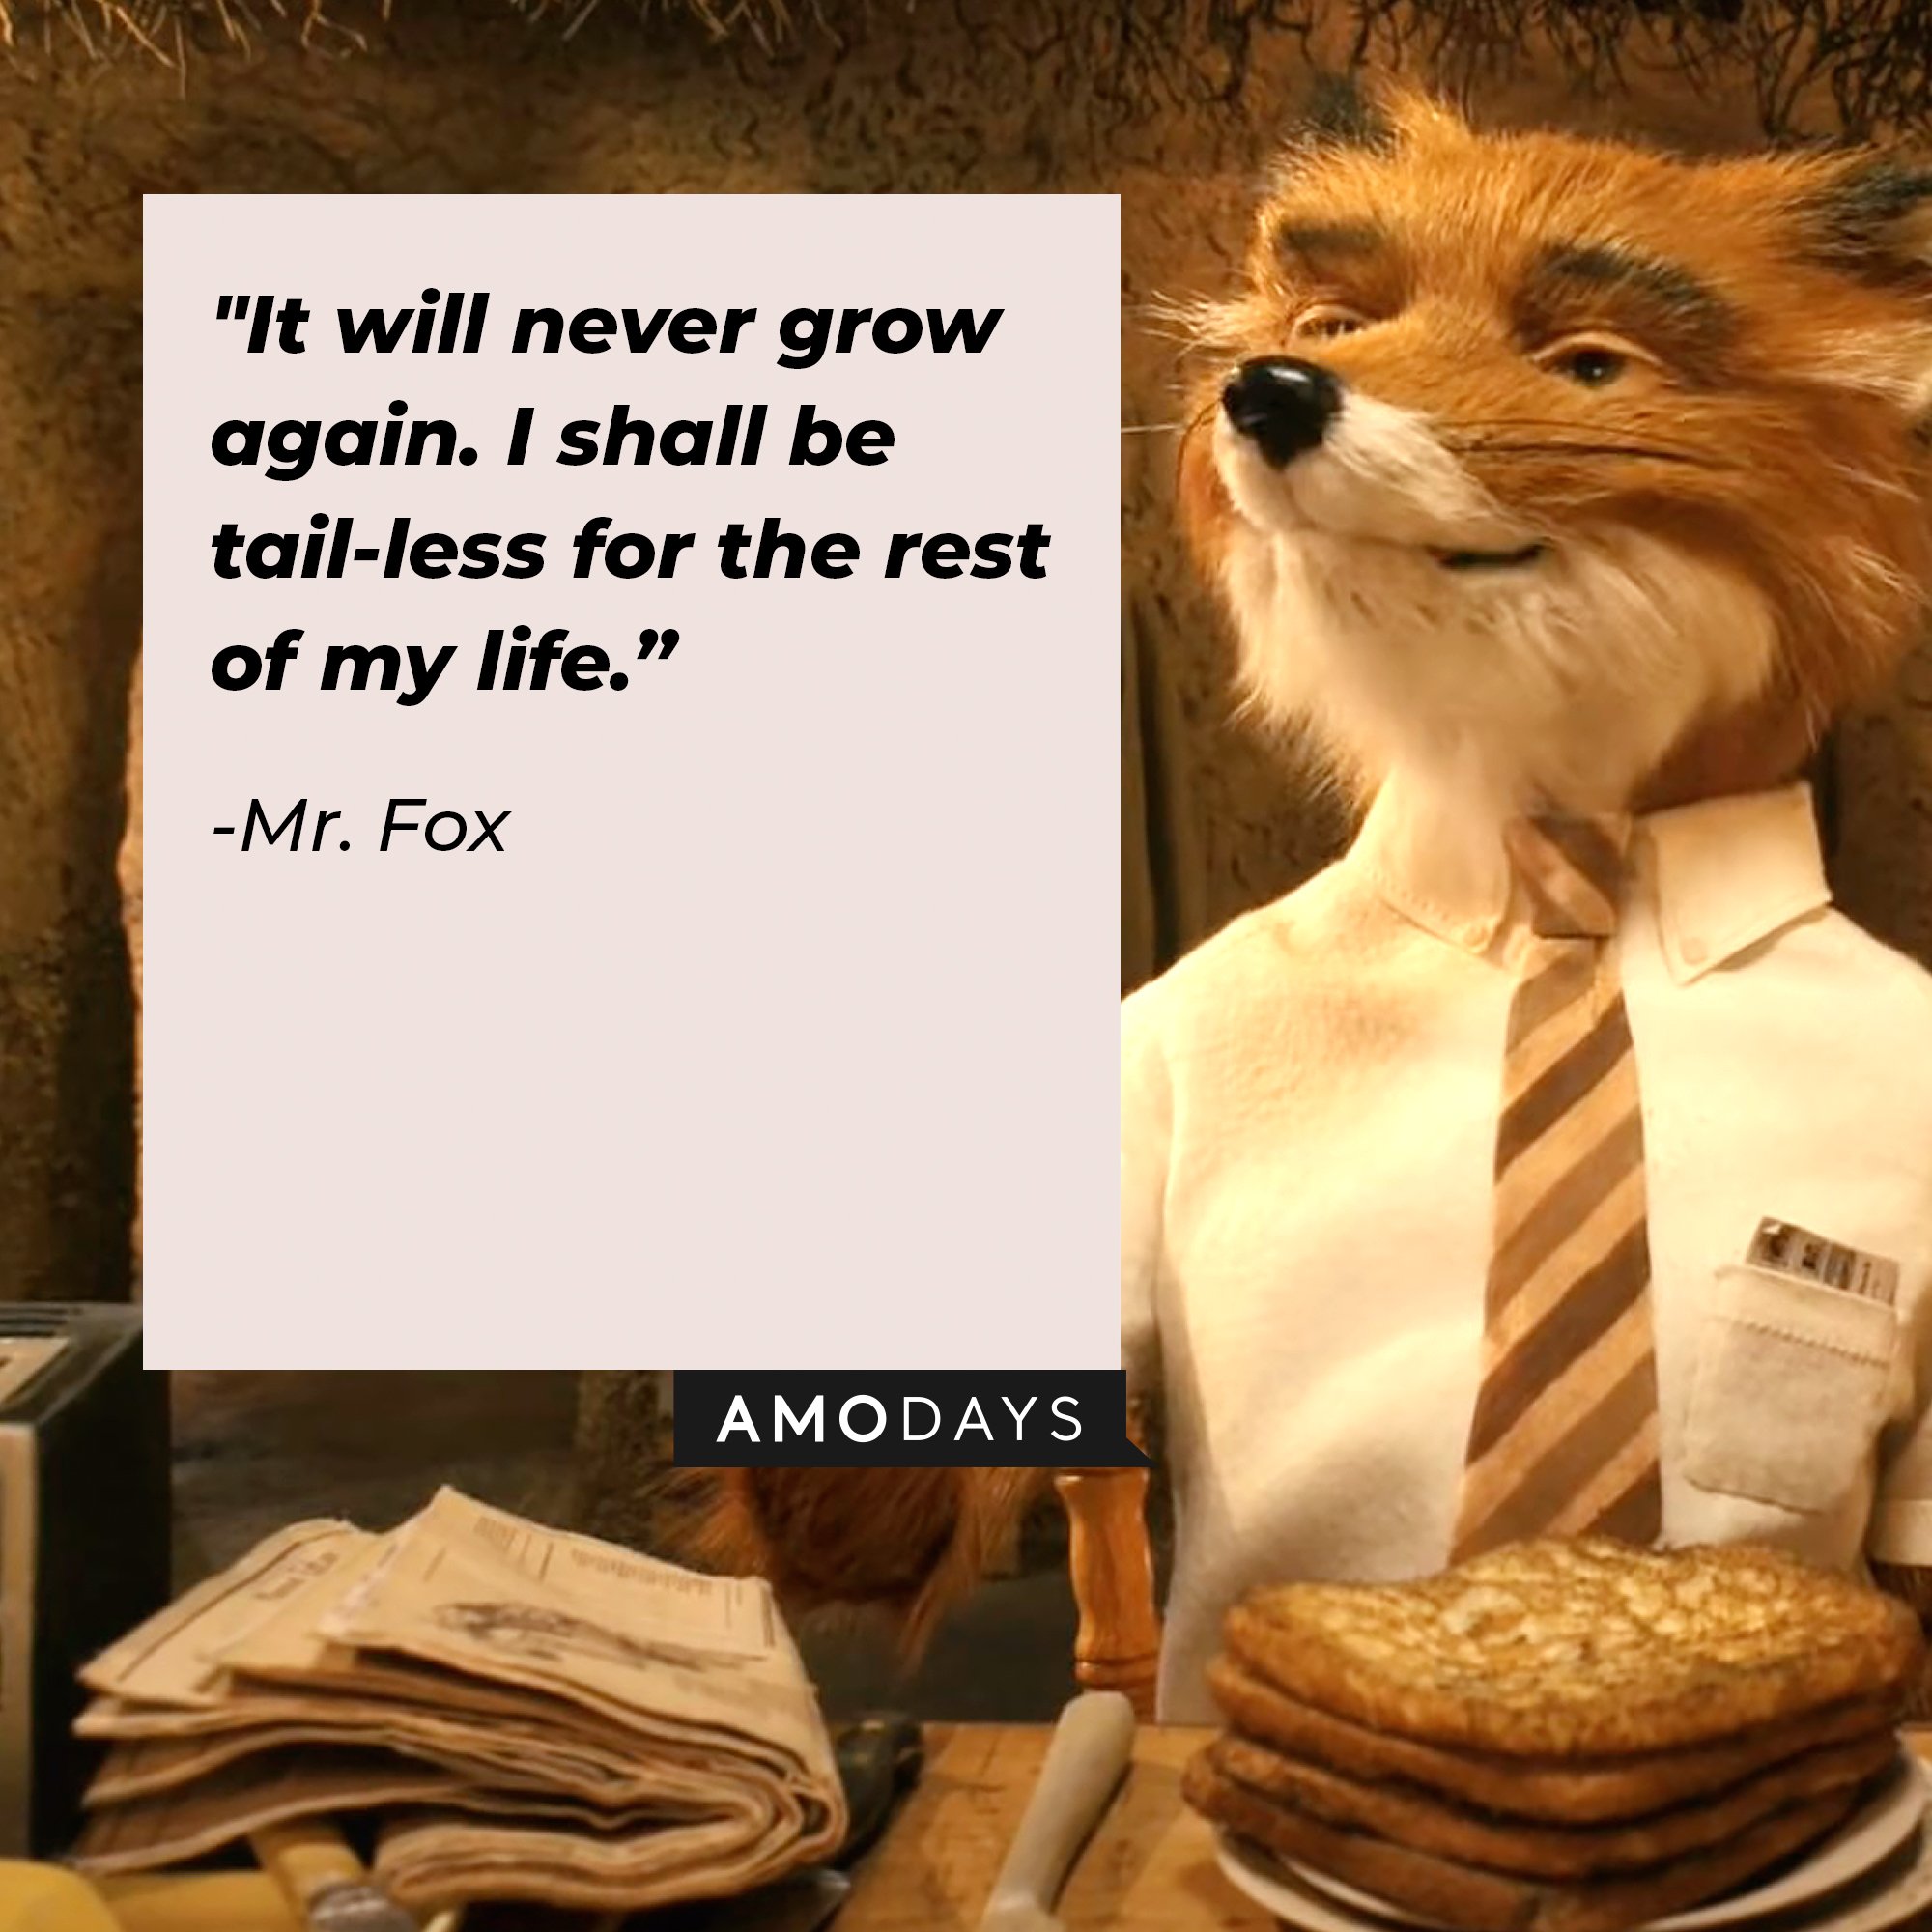  Mr. Fox's Quote: "It will never grow again. I shall be tail-less for the rest of my life." | Image: AmoDays